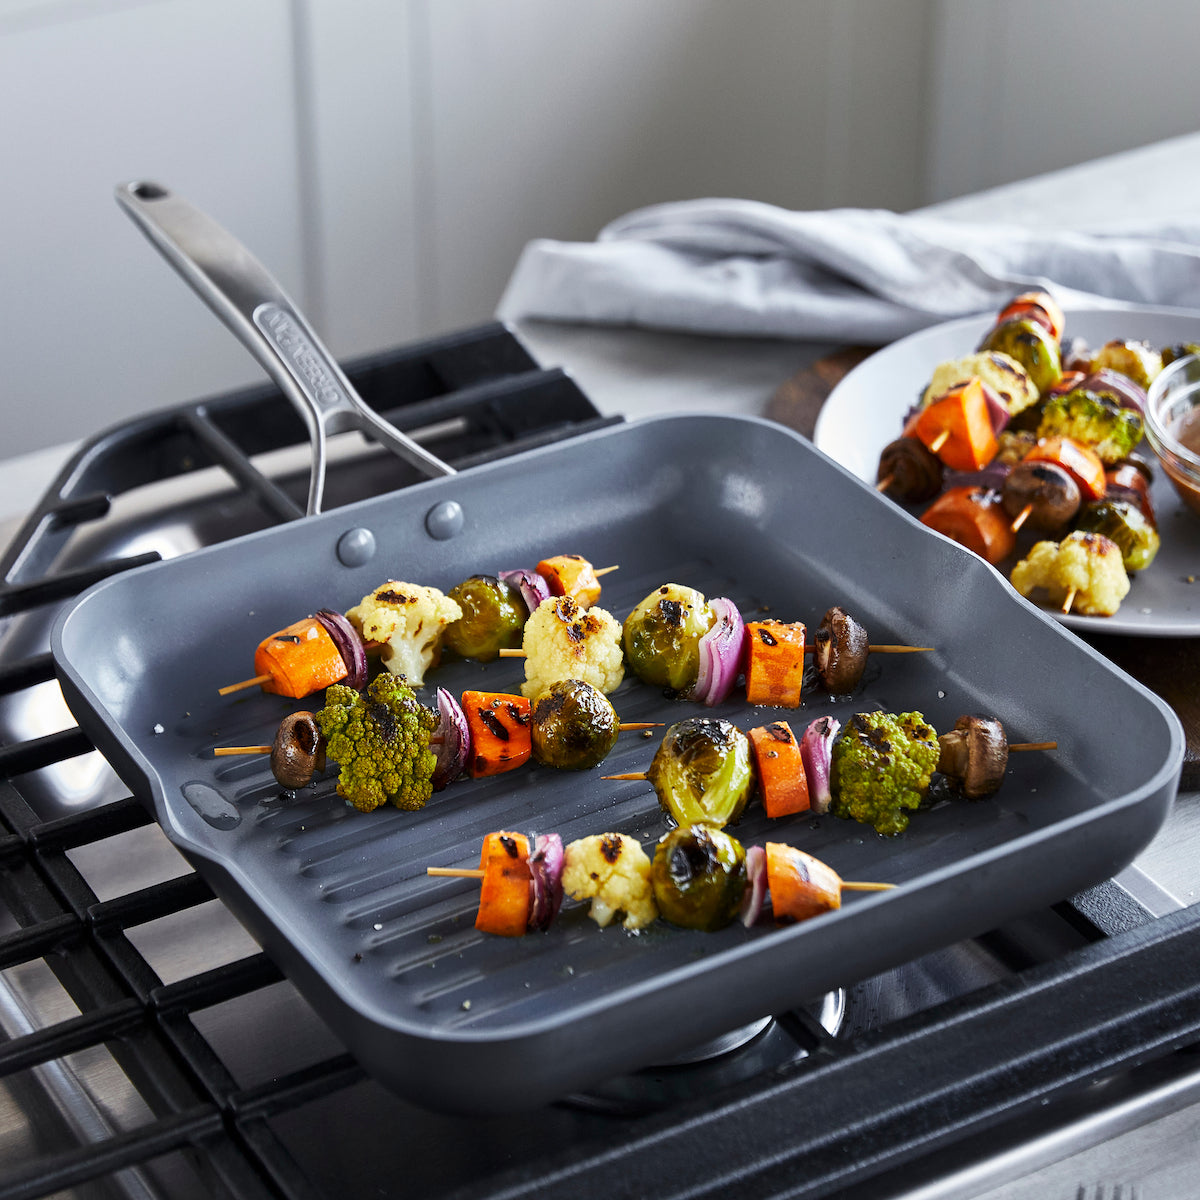 Kitchen + Home Nonstick Stove Top Grill Pan & Reviews